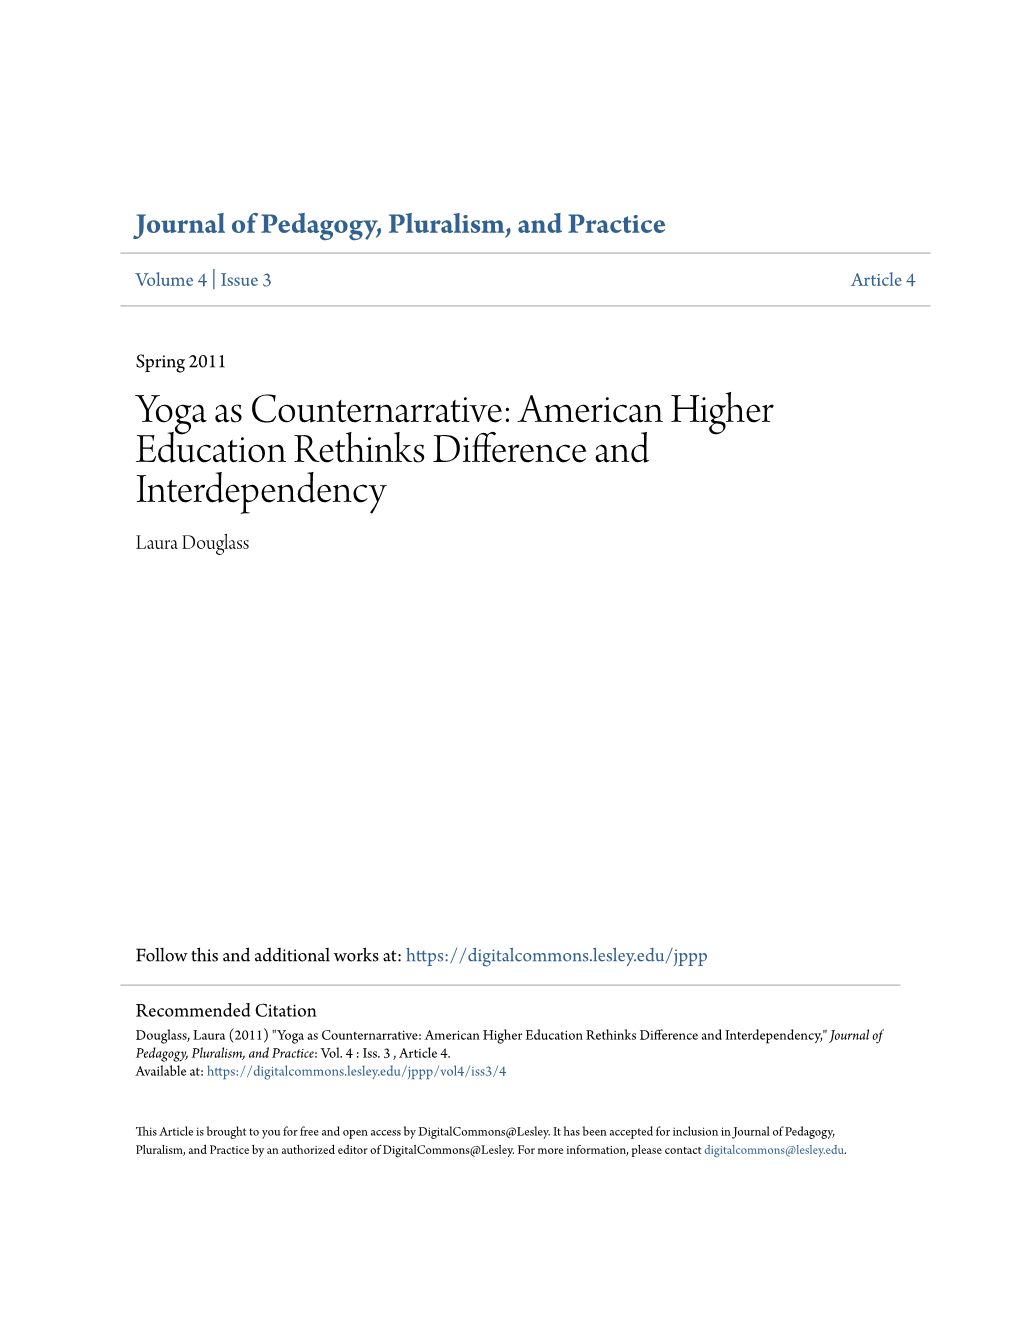 Yoga As Counternarrative: American Higher Education Rethinks Difference and Interdependency Laura Douglass